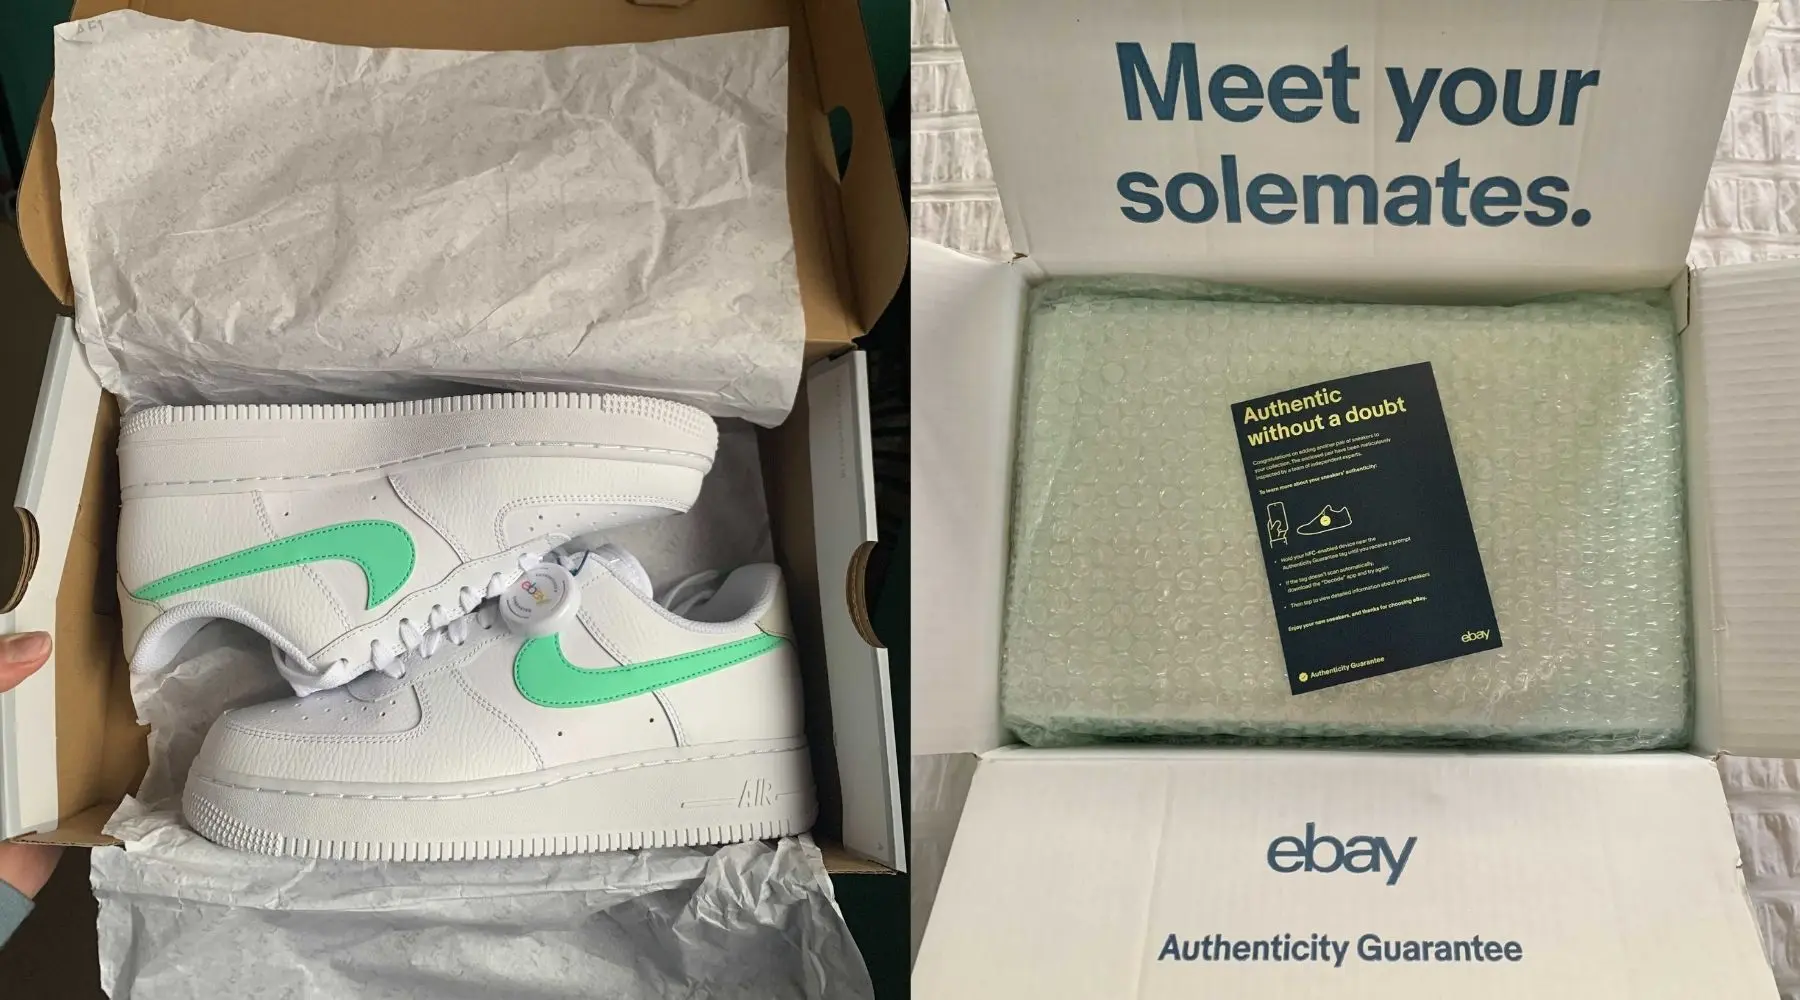 Buy authenticated sneakers from eBay 